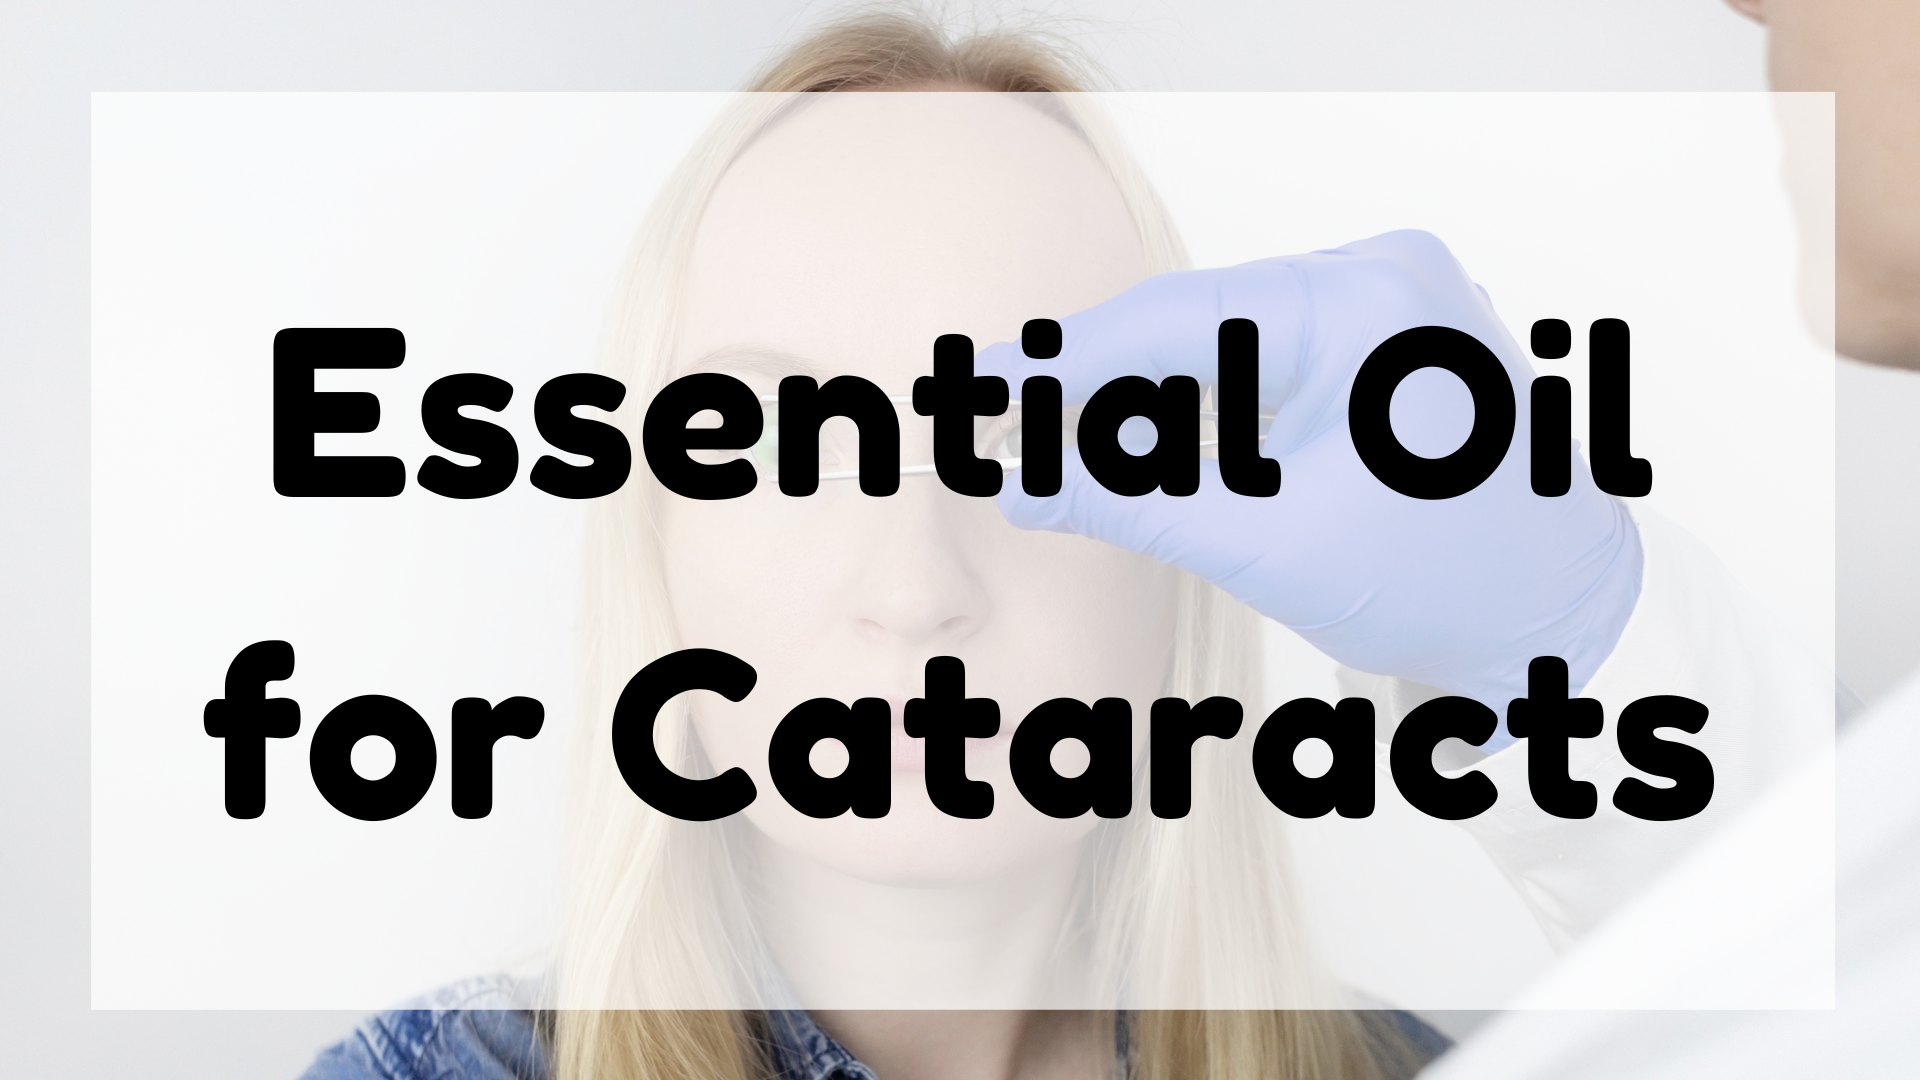 Essential Oil for Cataracts featured image